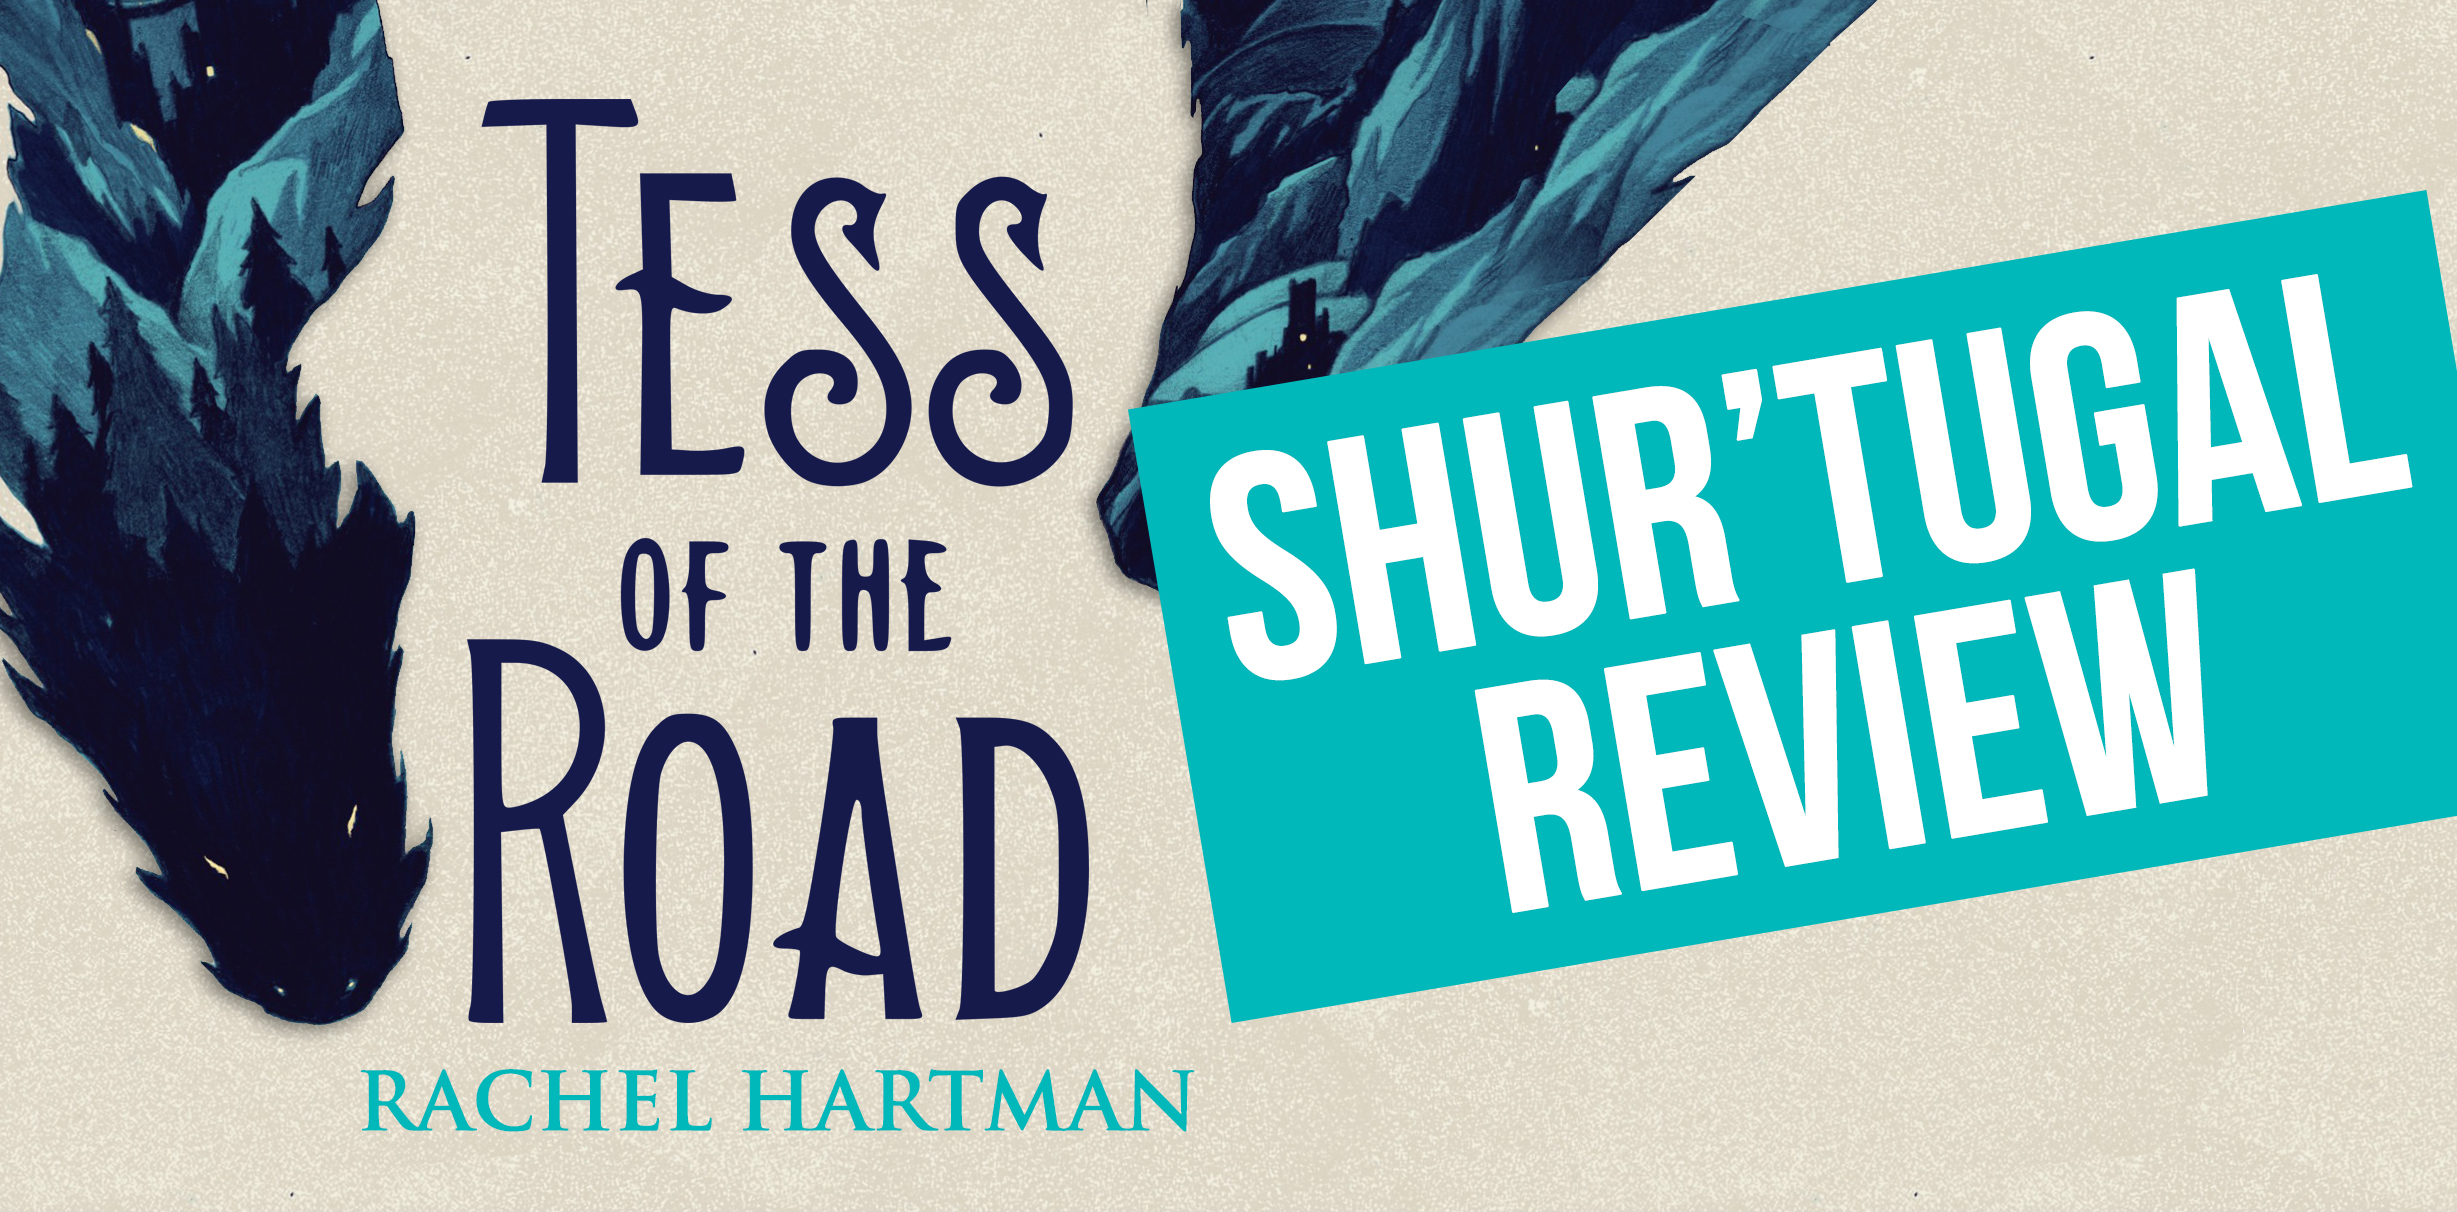 ‘Tess of the Road’ is a medieval masterpiece filled to the brim with self-discovery and an epic quest